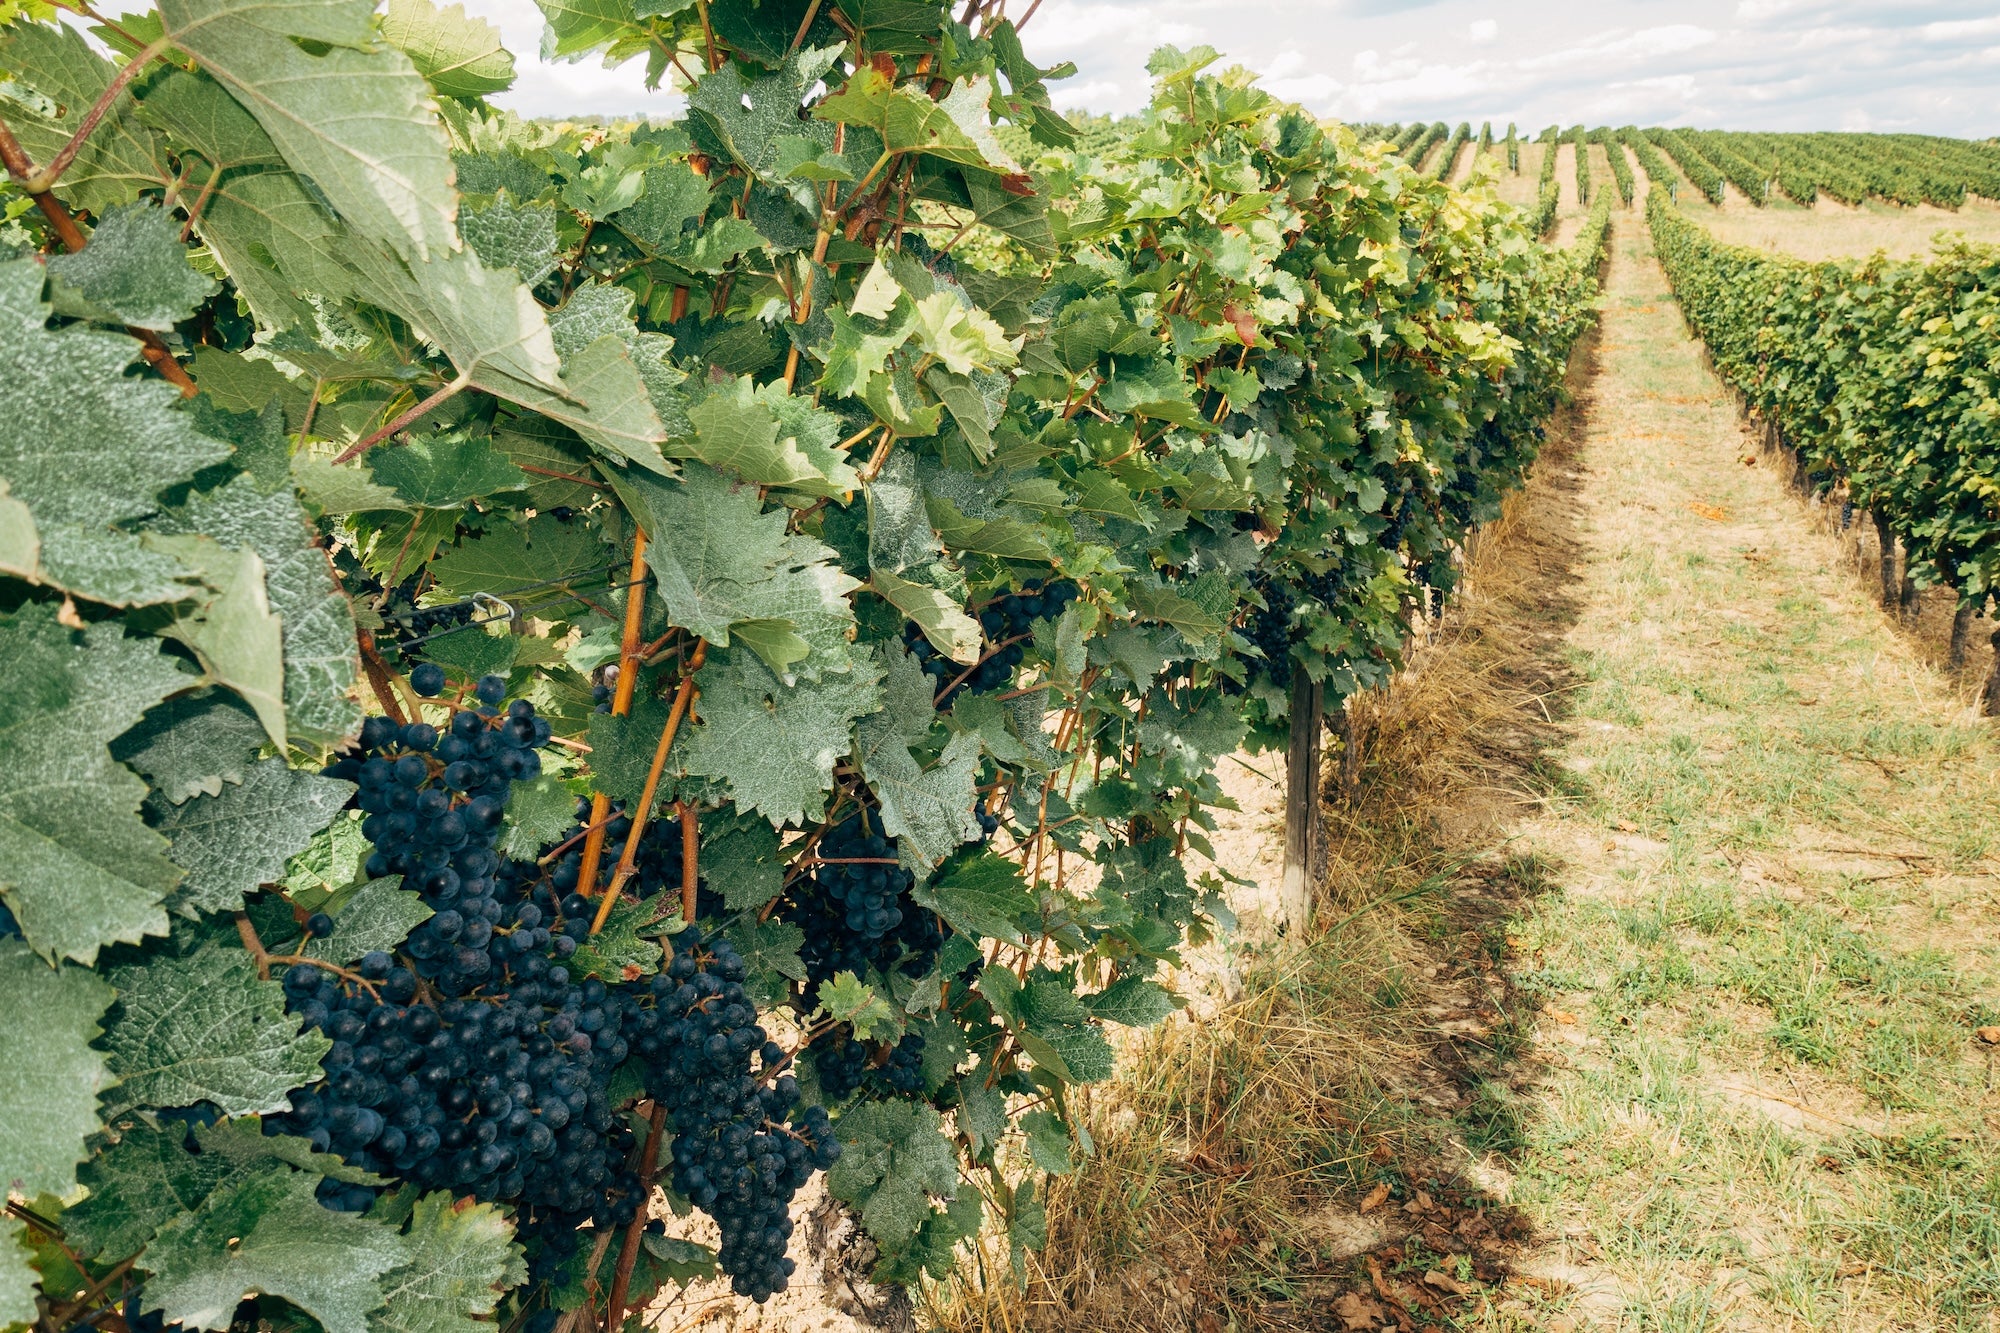 Bunches of black grapes hanging on vines with many rows of vines stretching out to the right